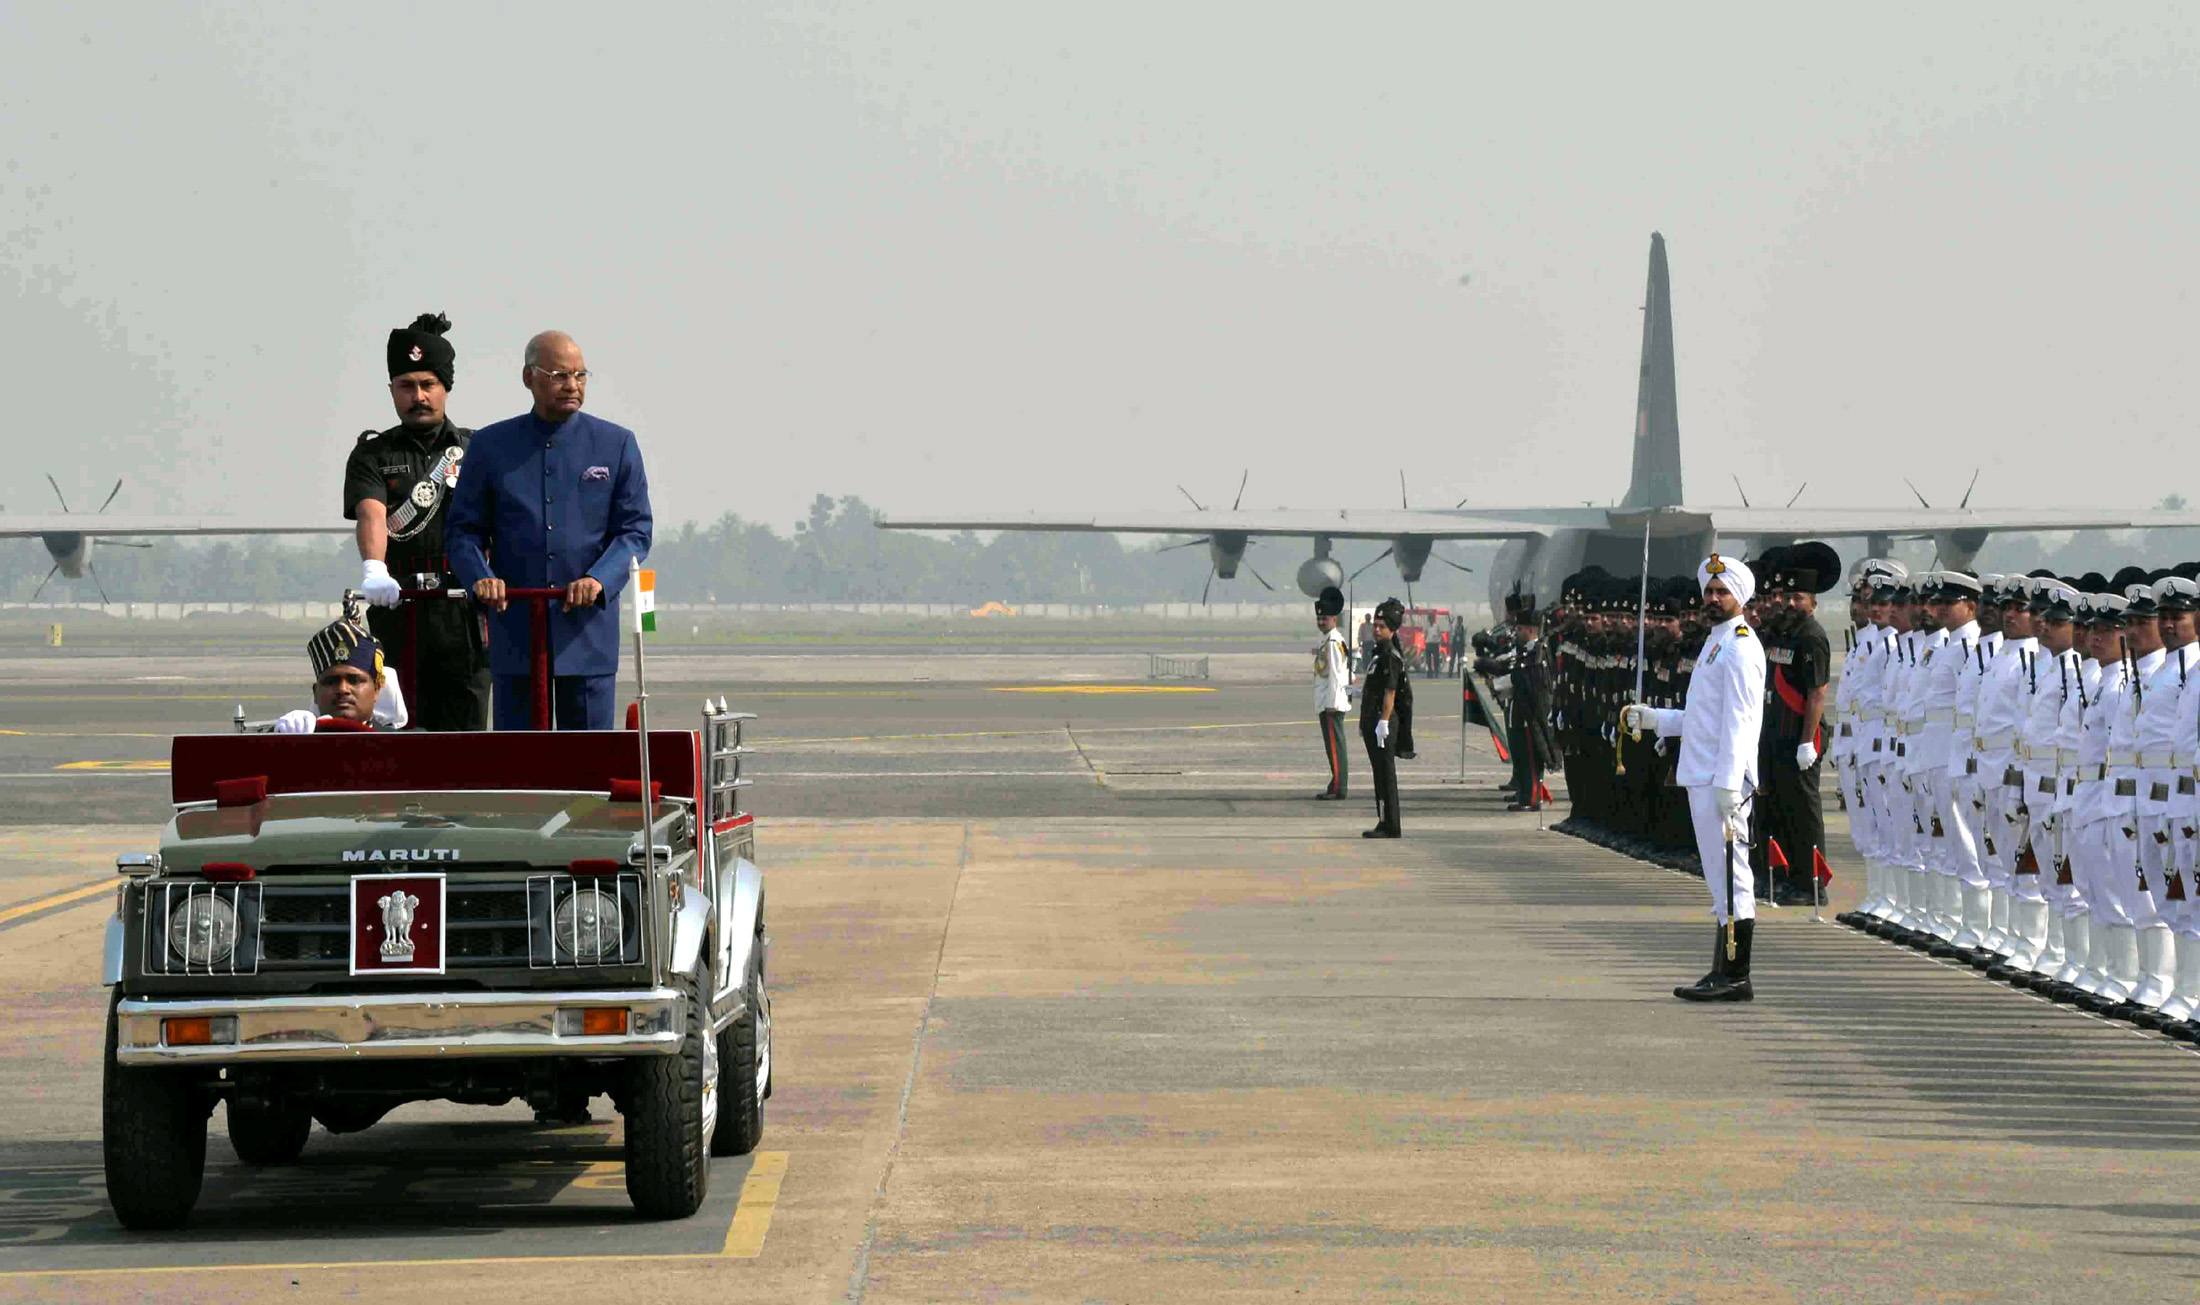 The President, Shri Ram Nath Kovind inspecting the Guard of Honour, during his arrival, at Kolkata Airport, in West Bengal on November 28, 2017.